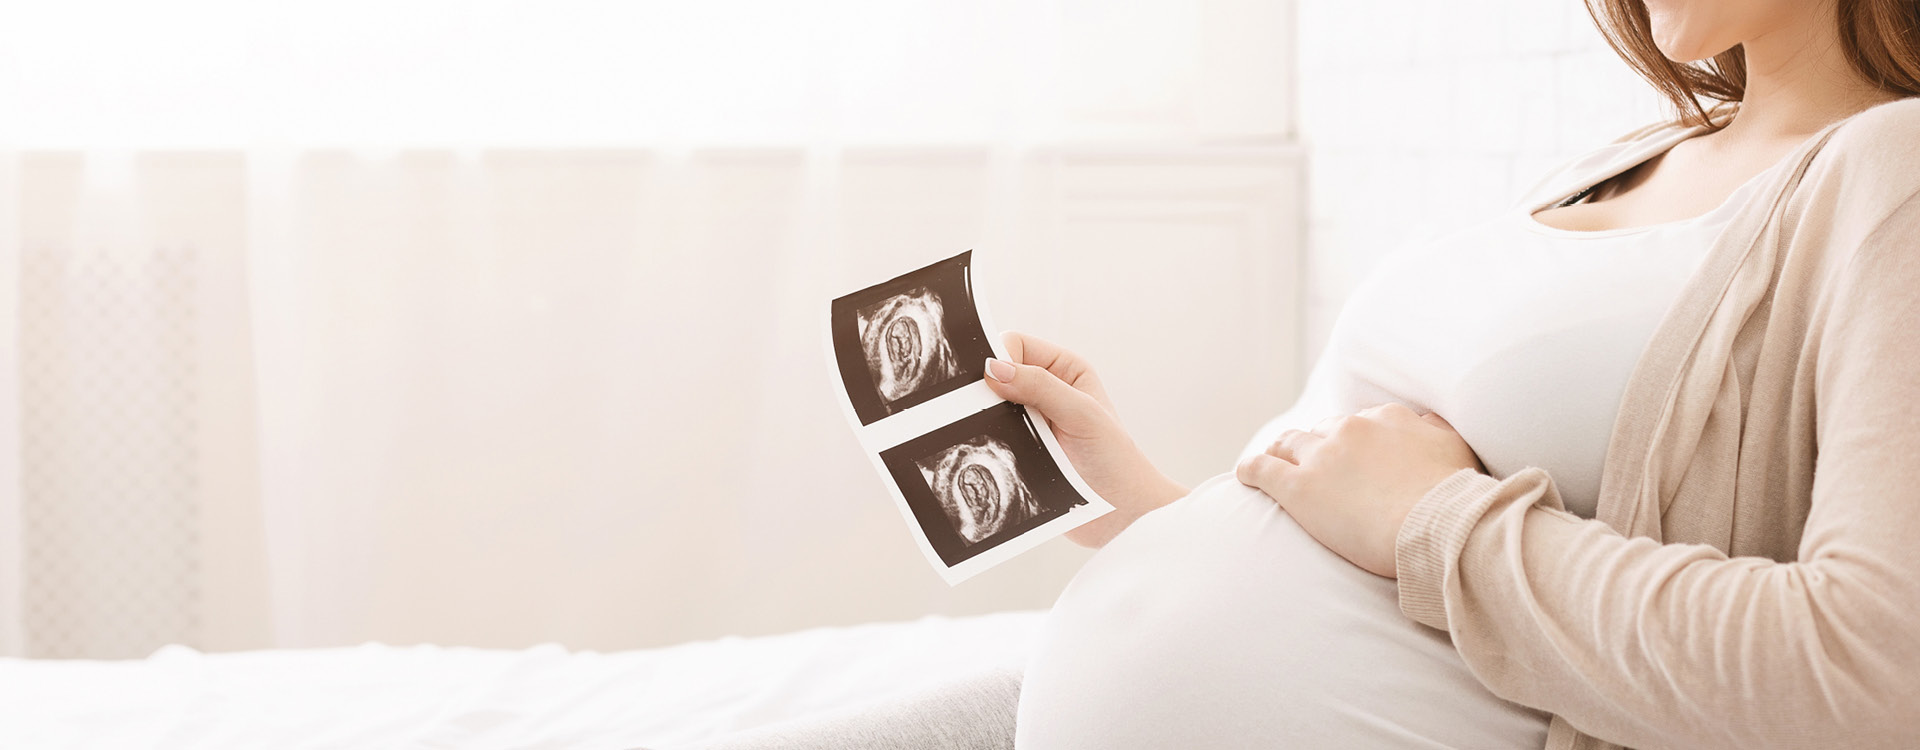 Ultrasounds During Pregnancy: What Doctors Look For Article Image